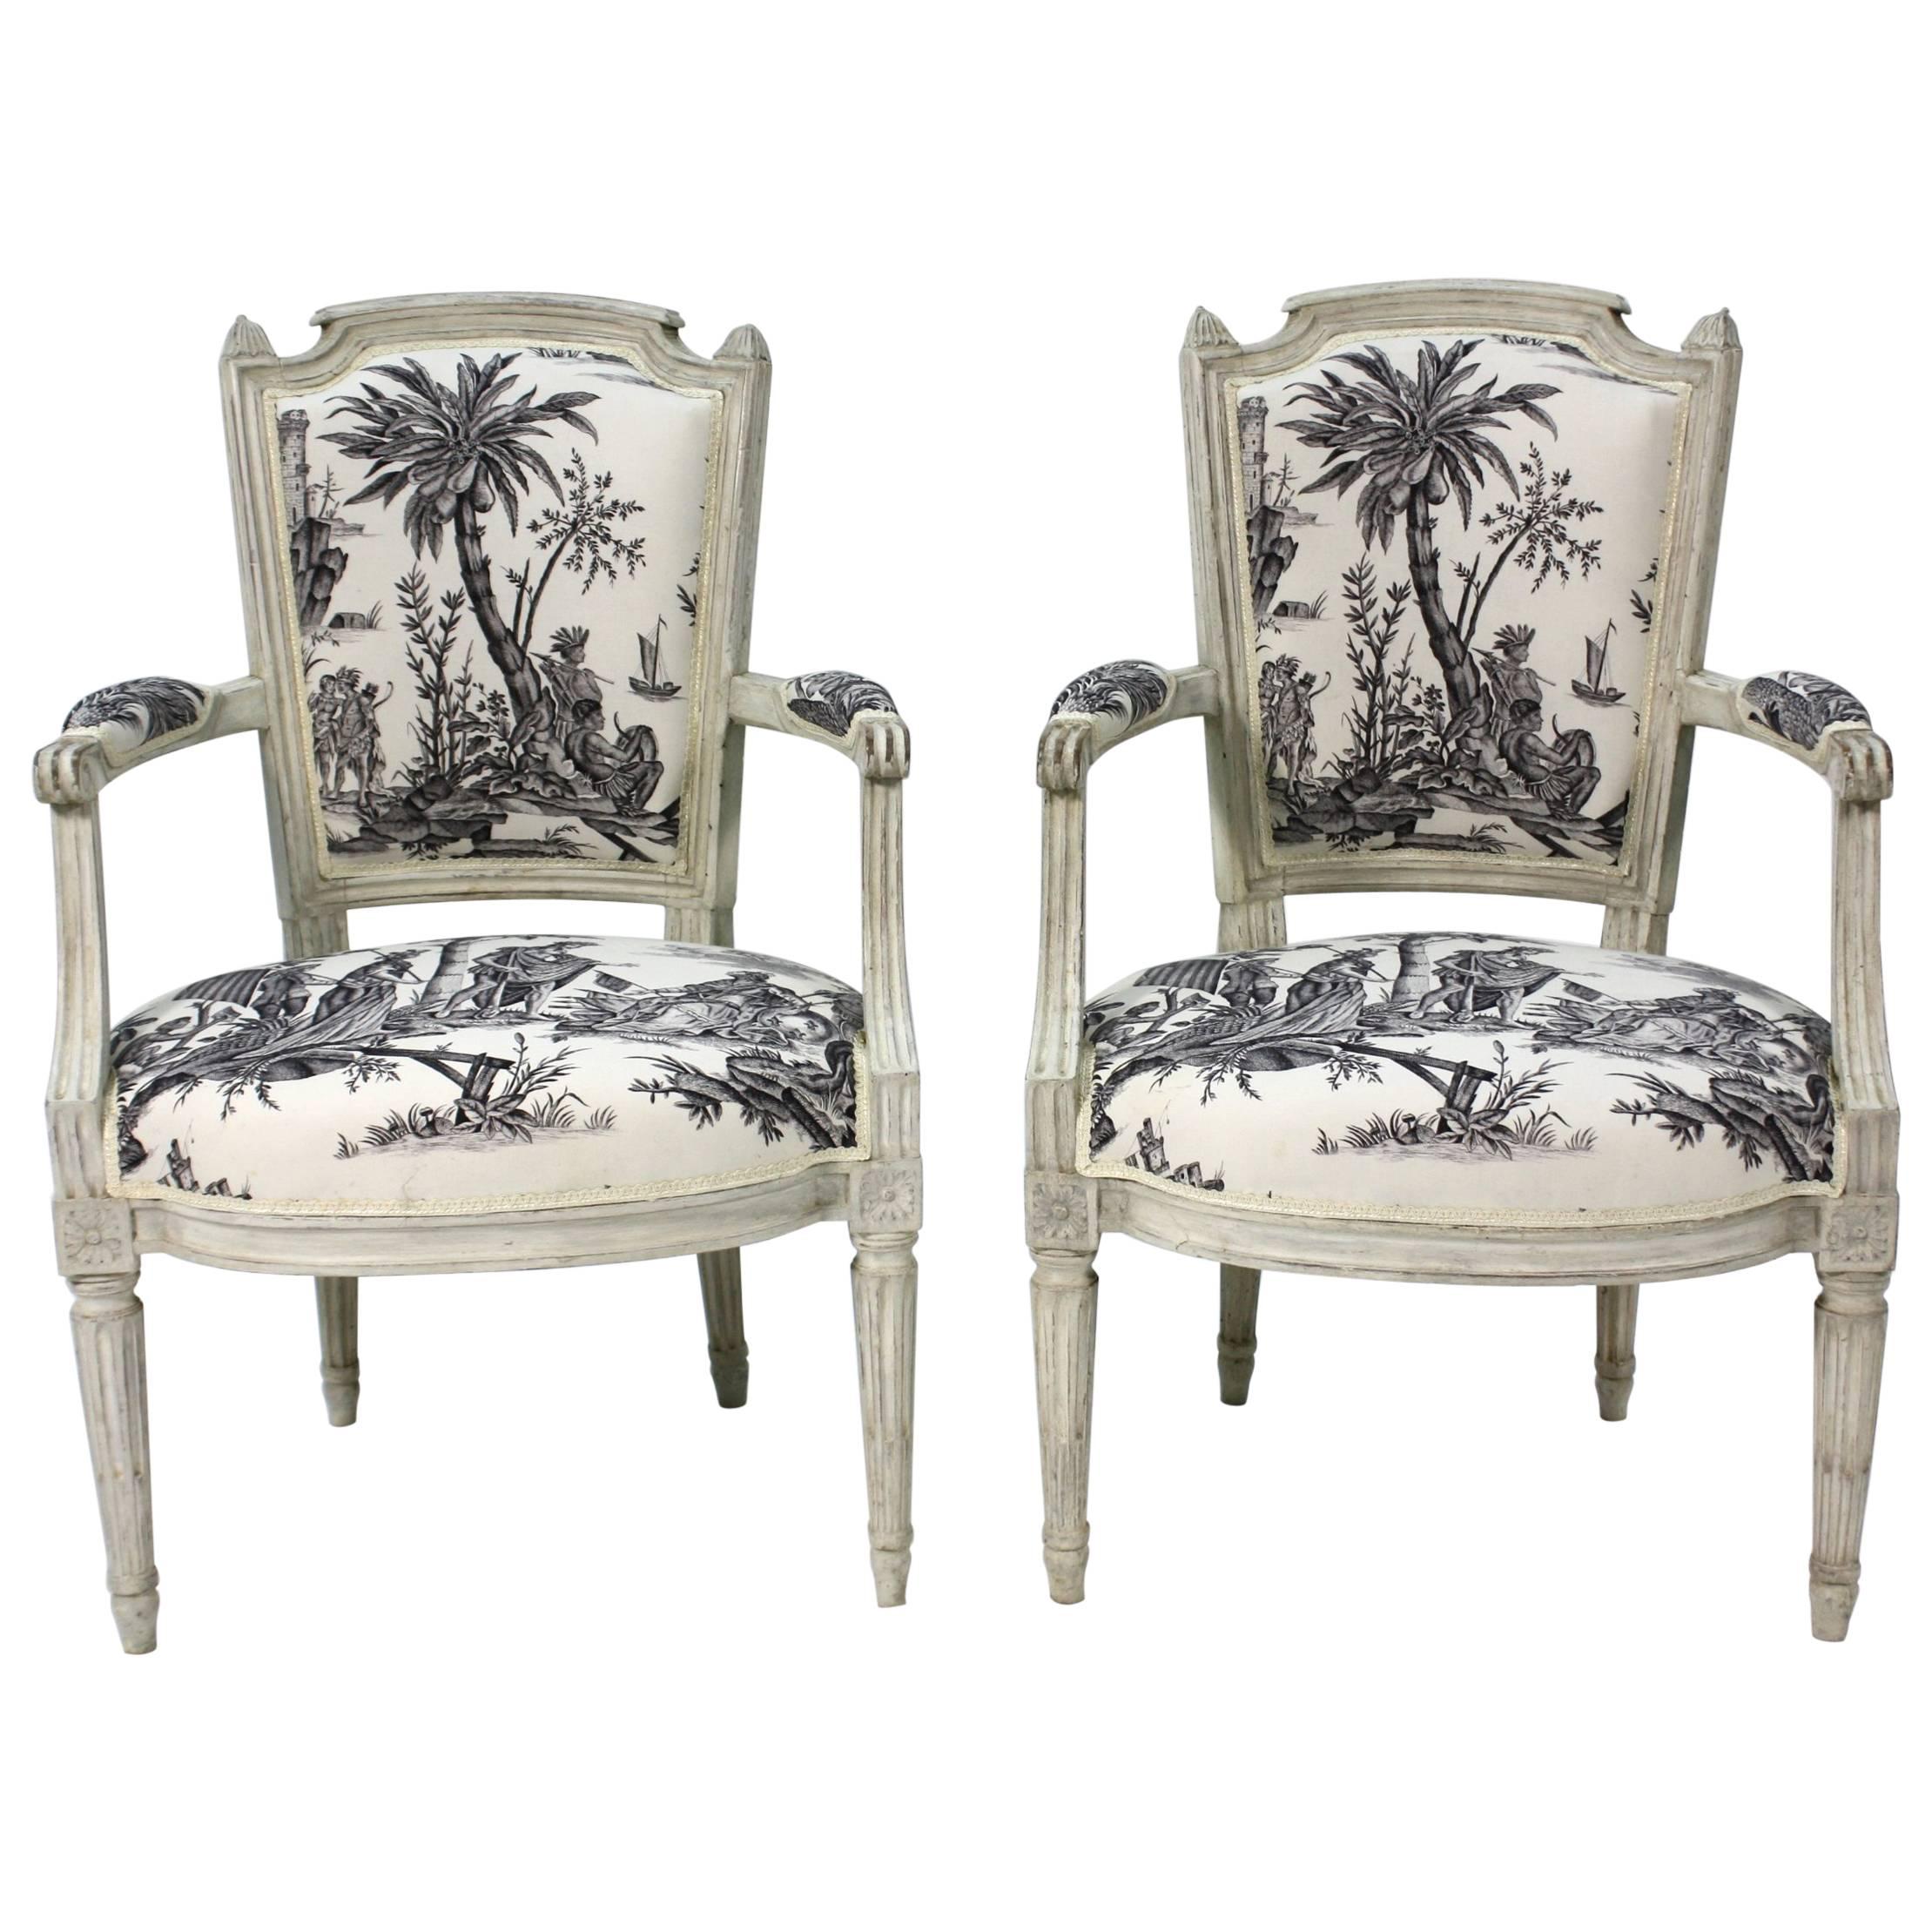 Pair of French Louis XVI Period Fauteuils or Armchairs